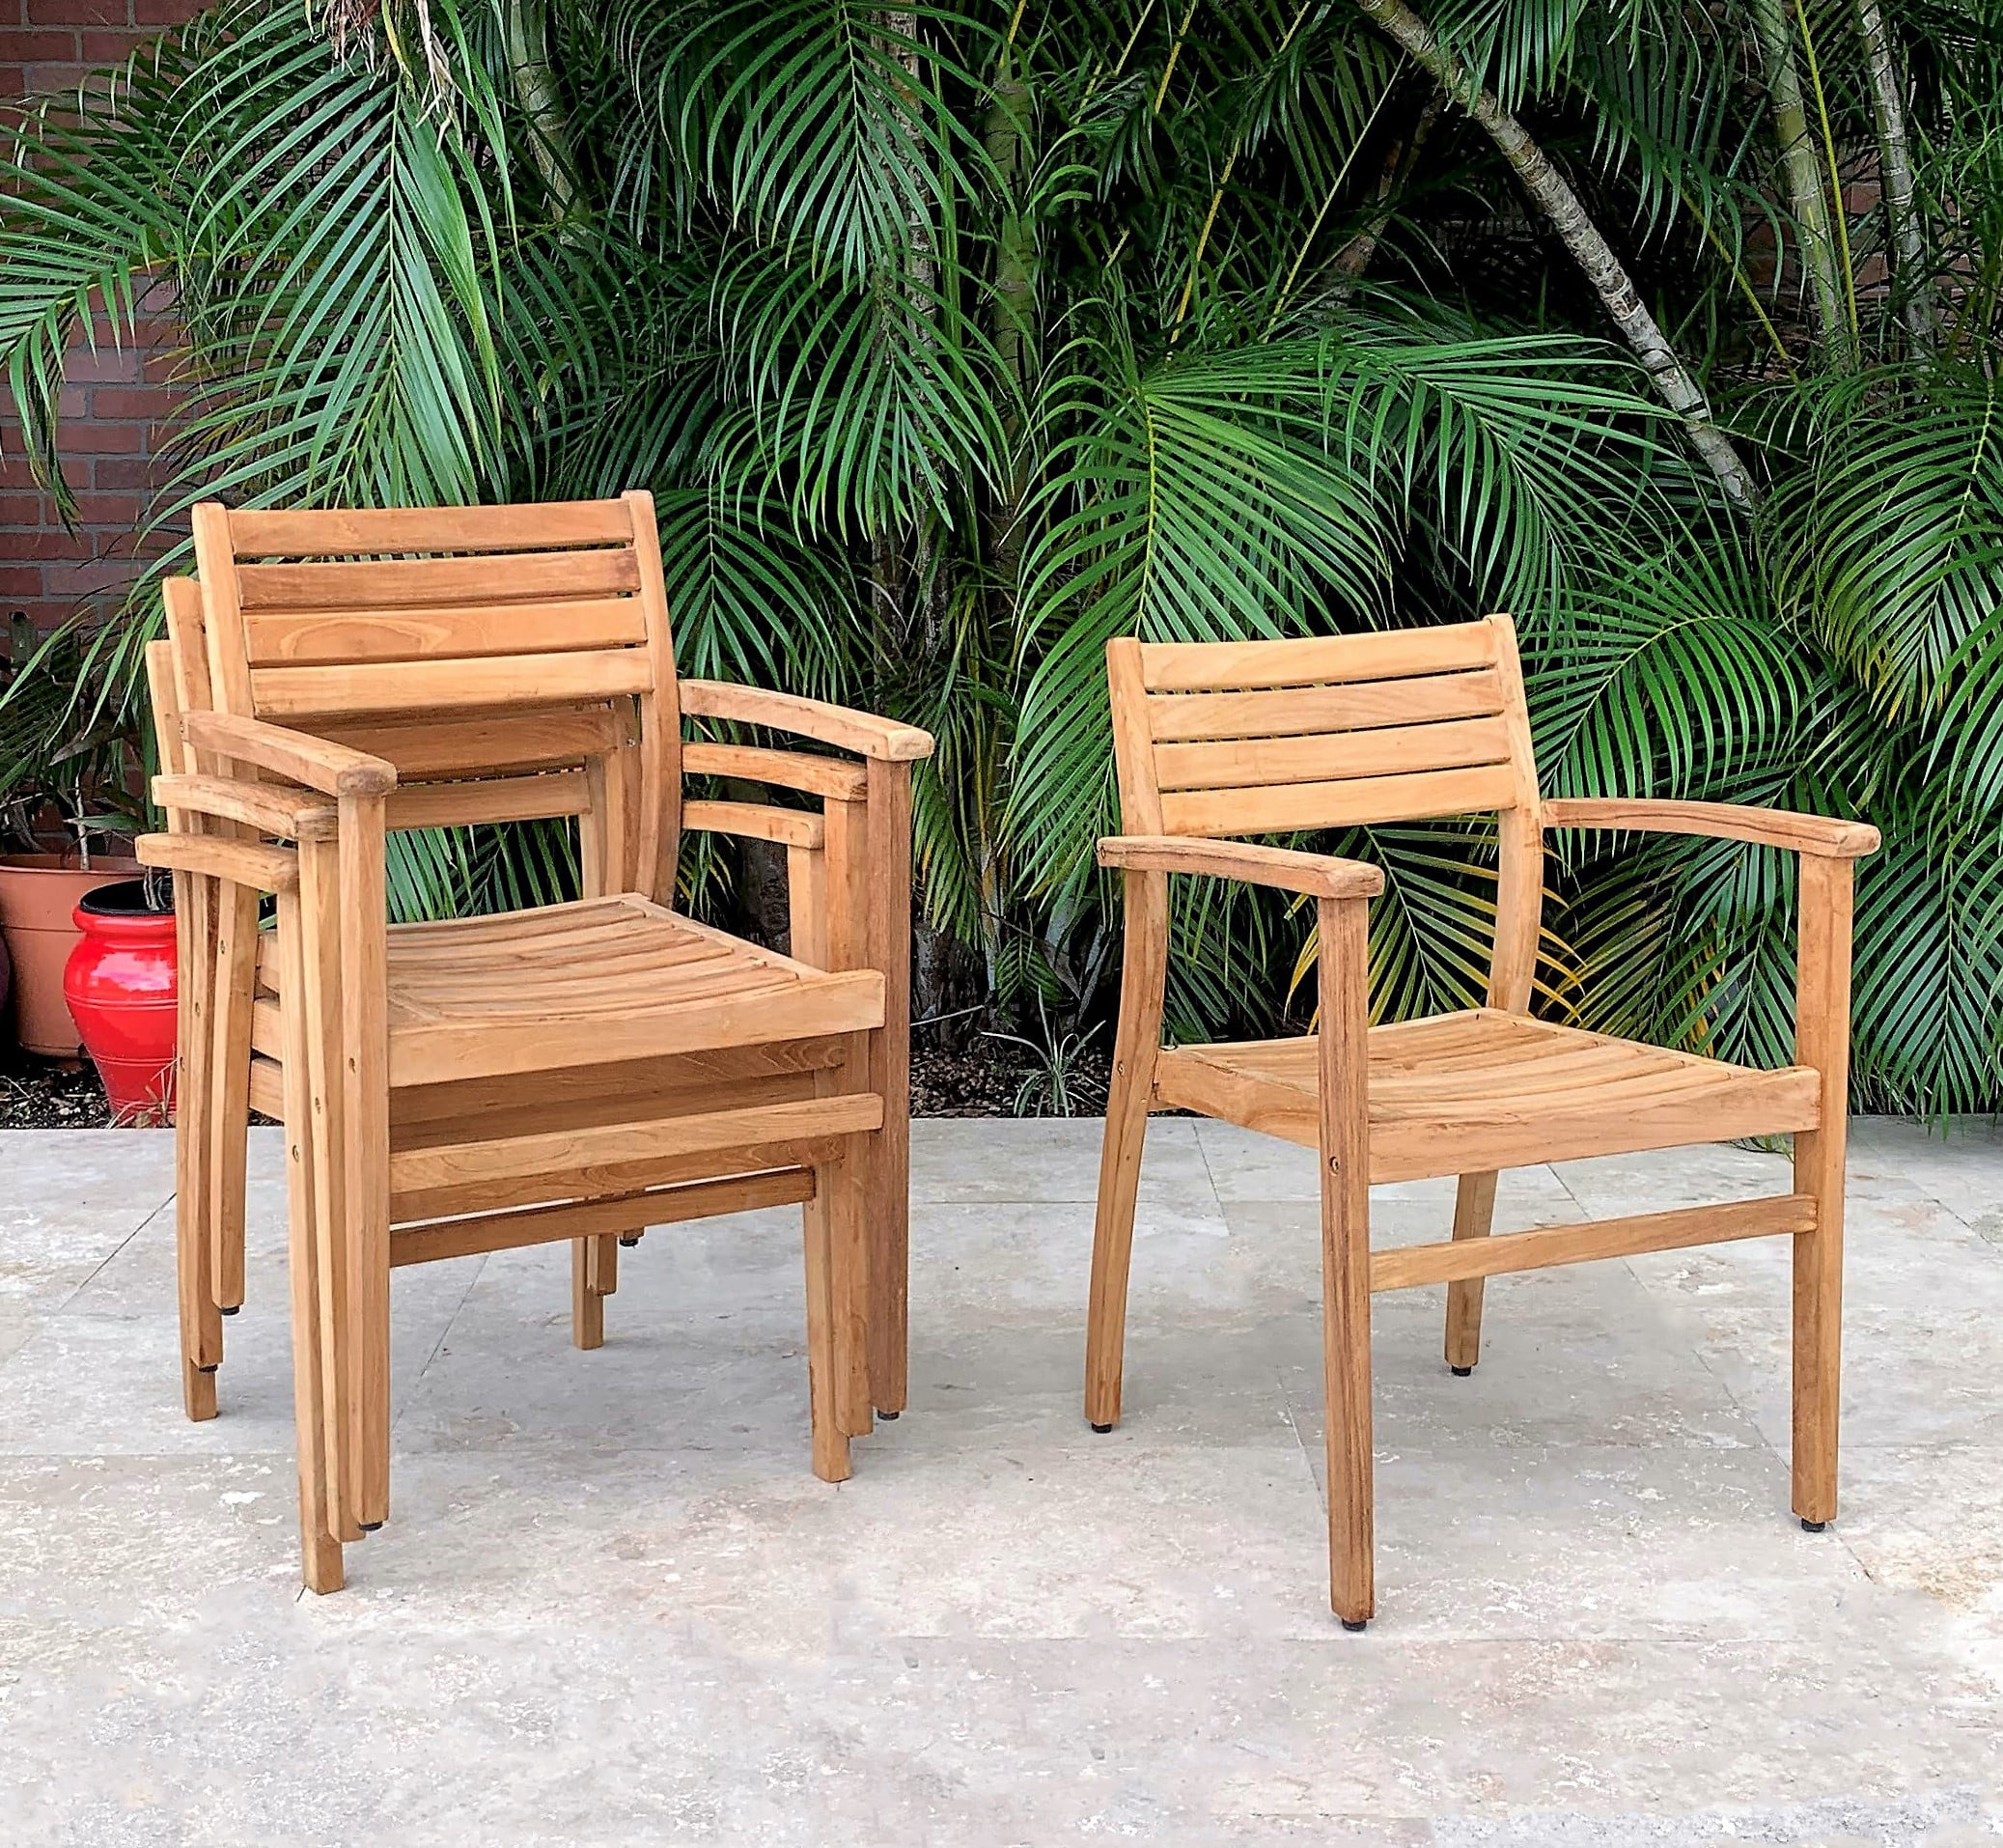 Looking to Buy Stackable Outdoor Chairs This Year. Here are 10 Things to Consider